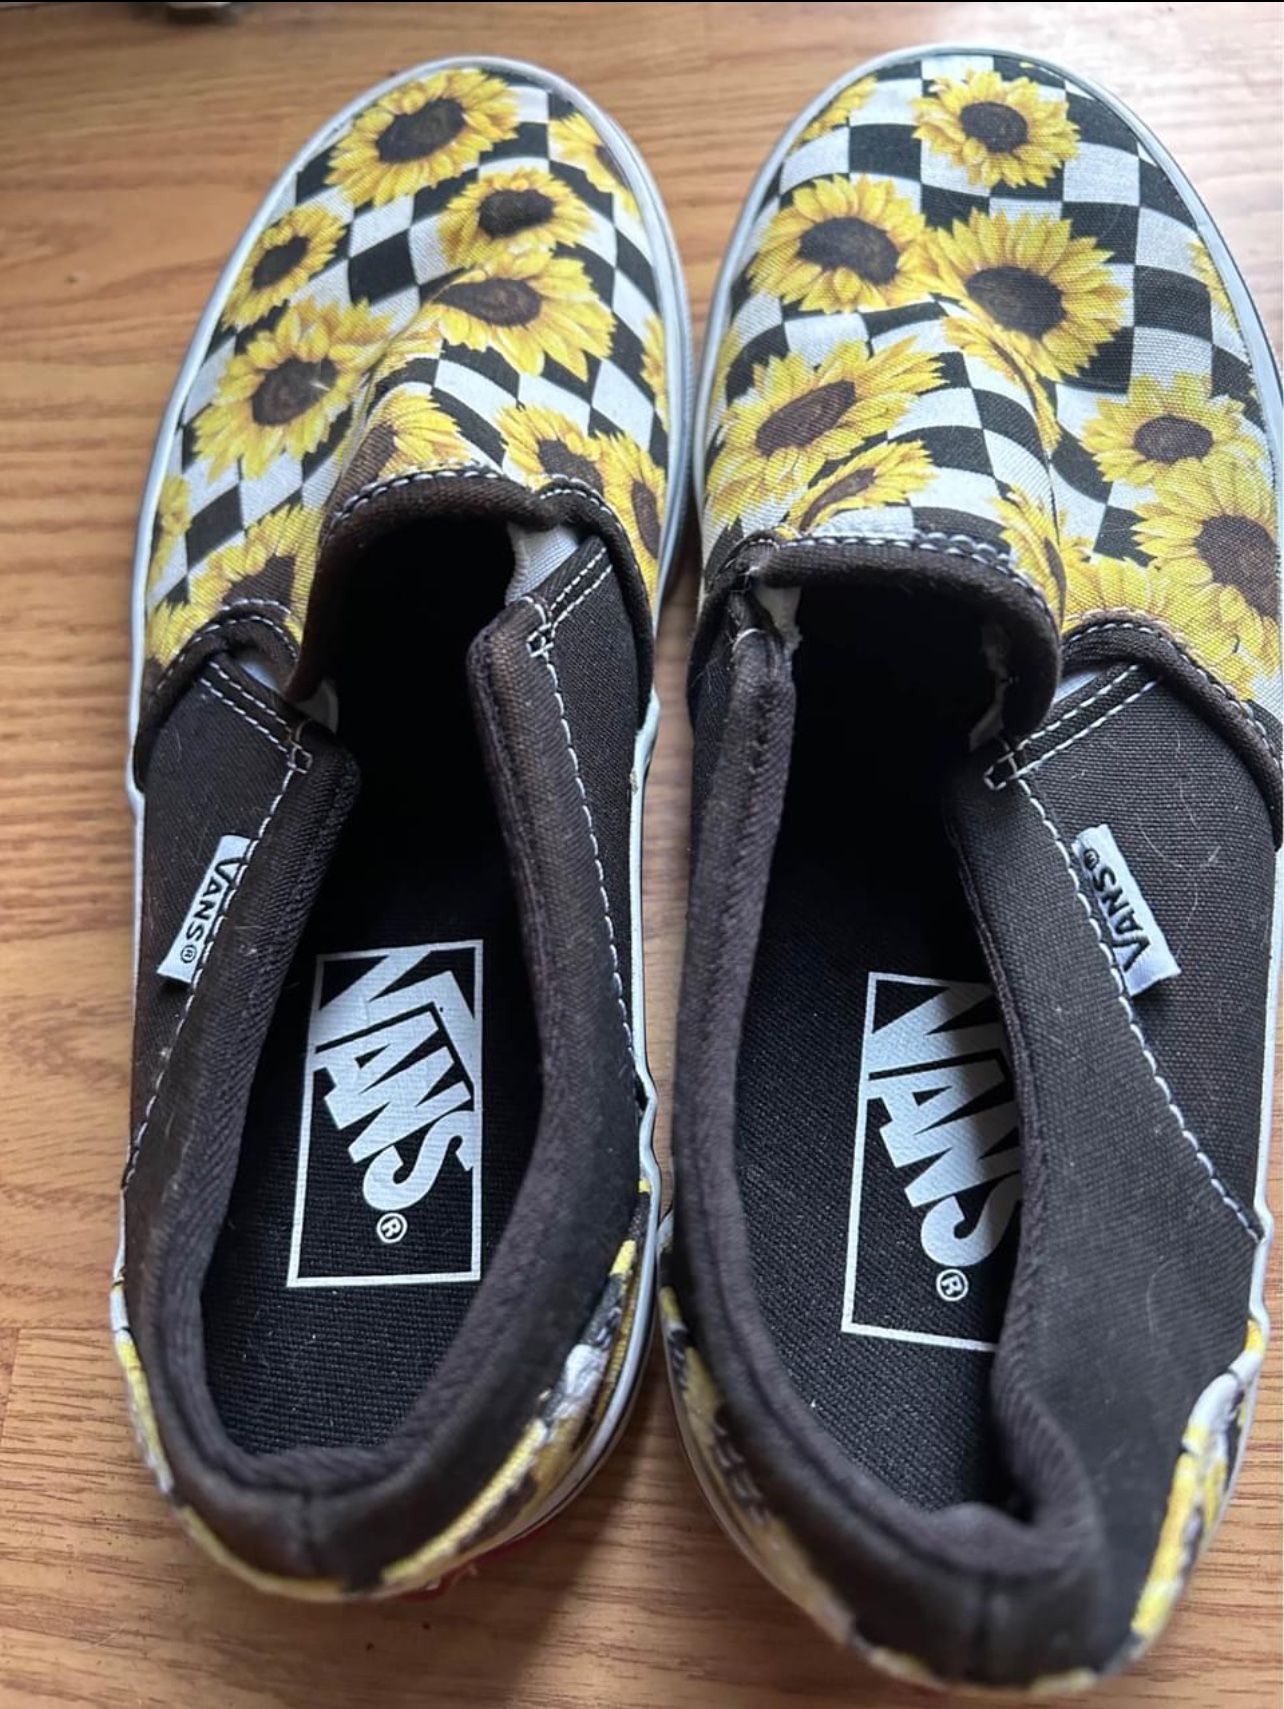 Youth Vans size 4 & Women’s 7 (youth 5.5)